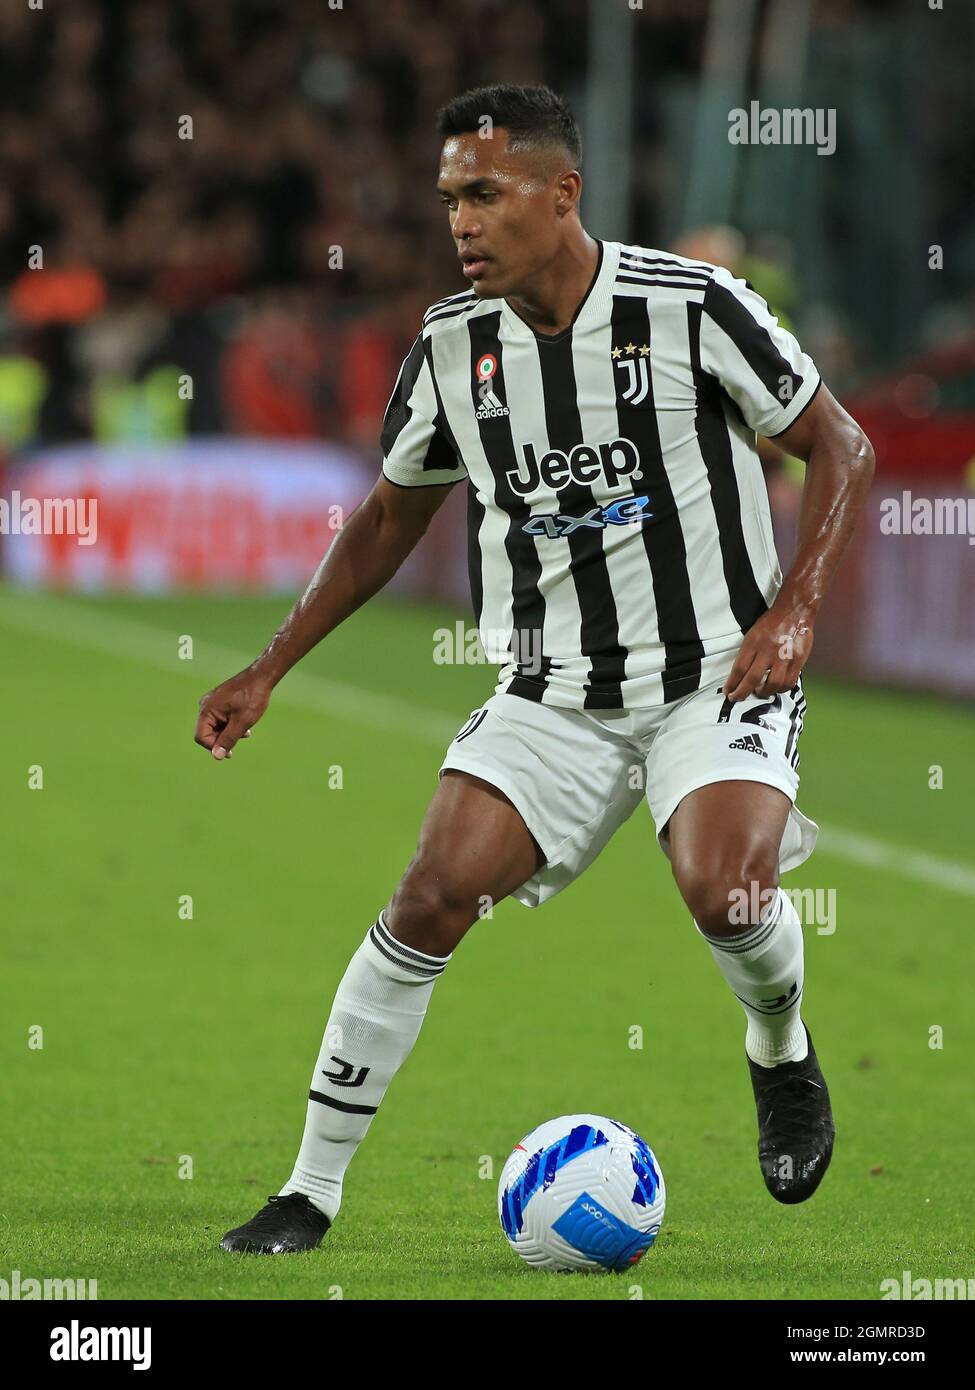 Turin, Italy. 19th Sep, 2021. Alex Sandro Lobo Silva (Juventus FC) during Juventus FC vs AC Milan, Italian football Serie A match in Turin, Italy, September 19 2021 Credit: Independent Photo Agency/Alamy Live News Stock Photo